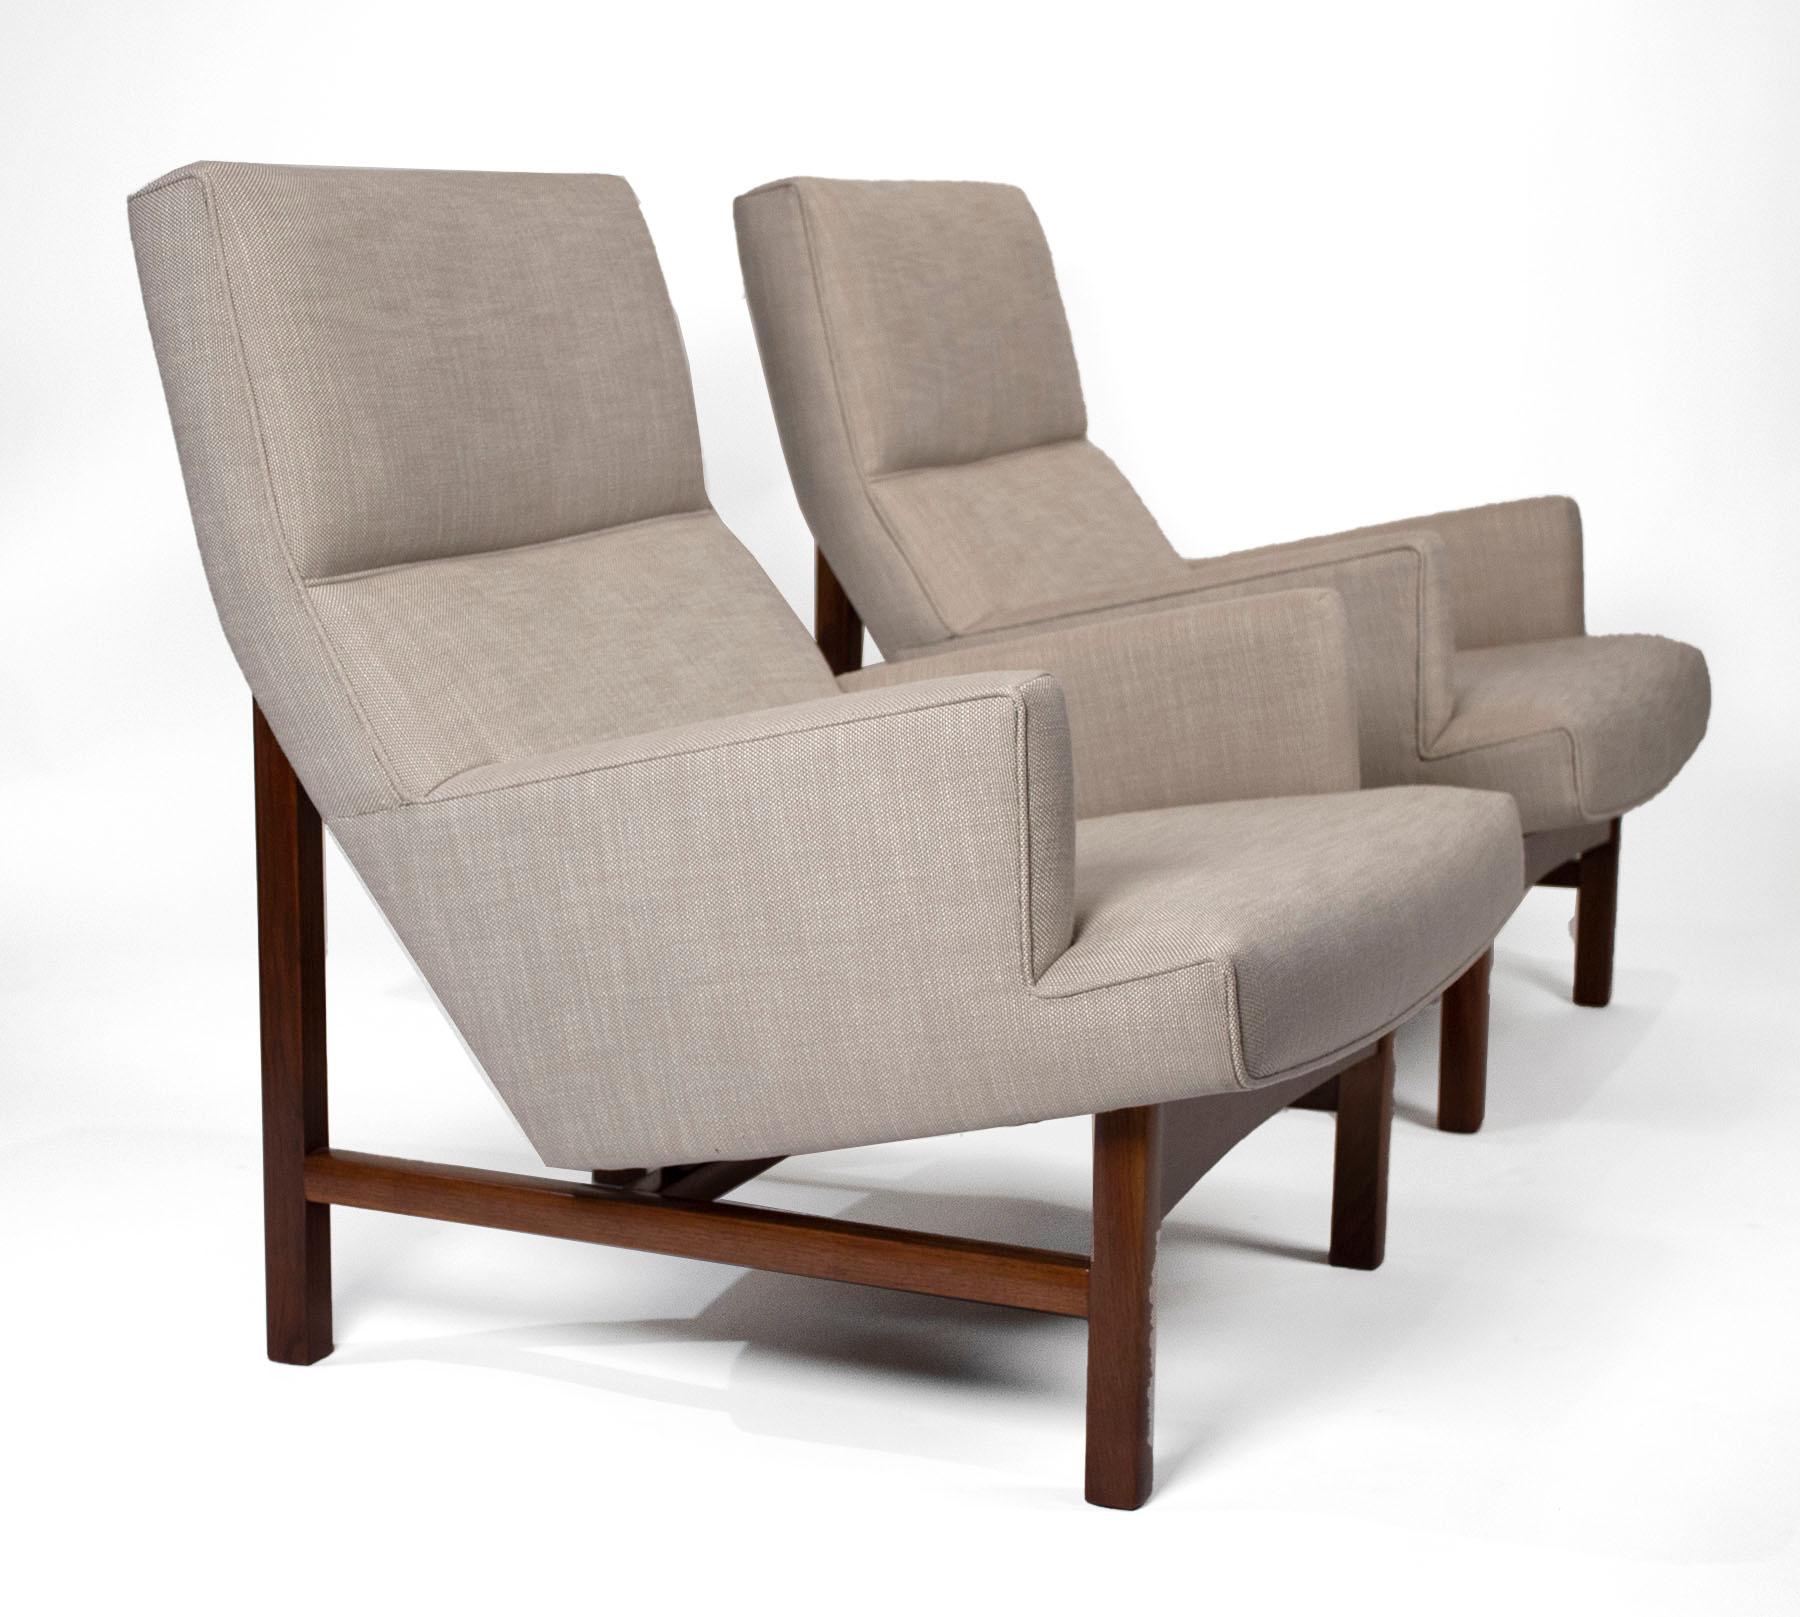 Georgeous pair of Jens Risom lounge chairs with solid walnut frames. Very comfortable and restored to the highest possible standard. 

A third chair is also available as a single.

